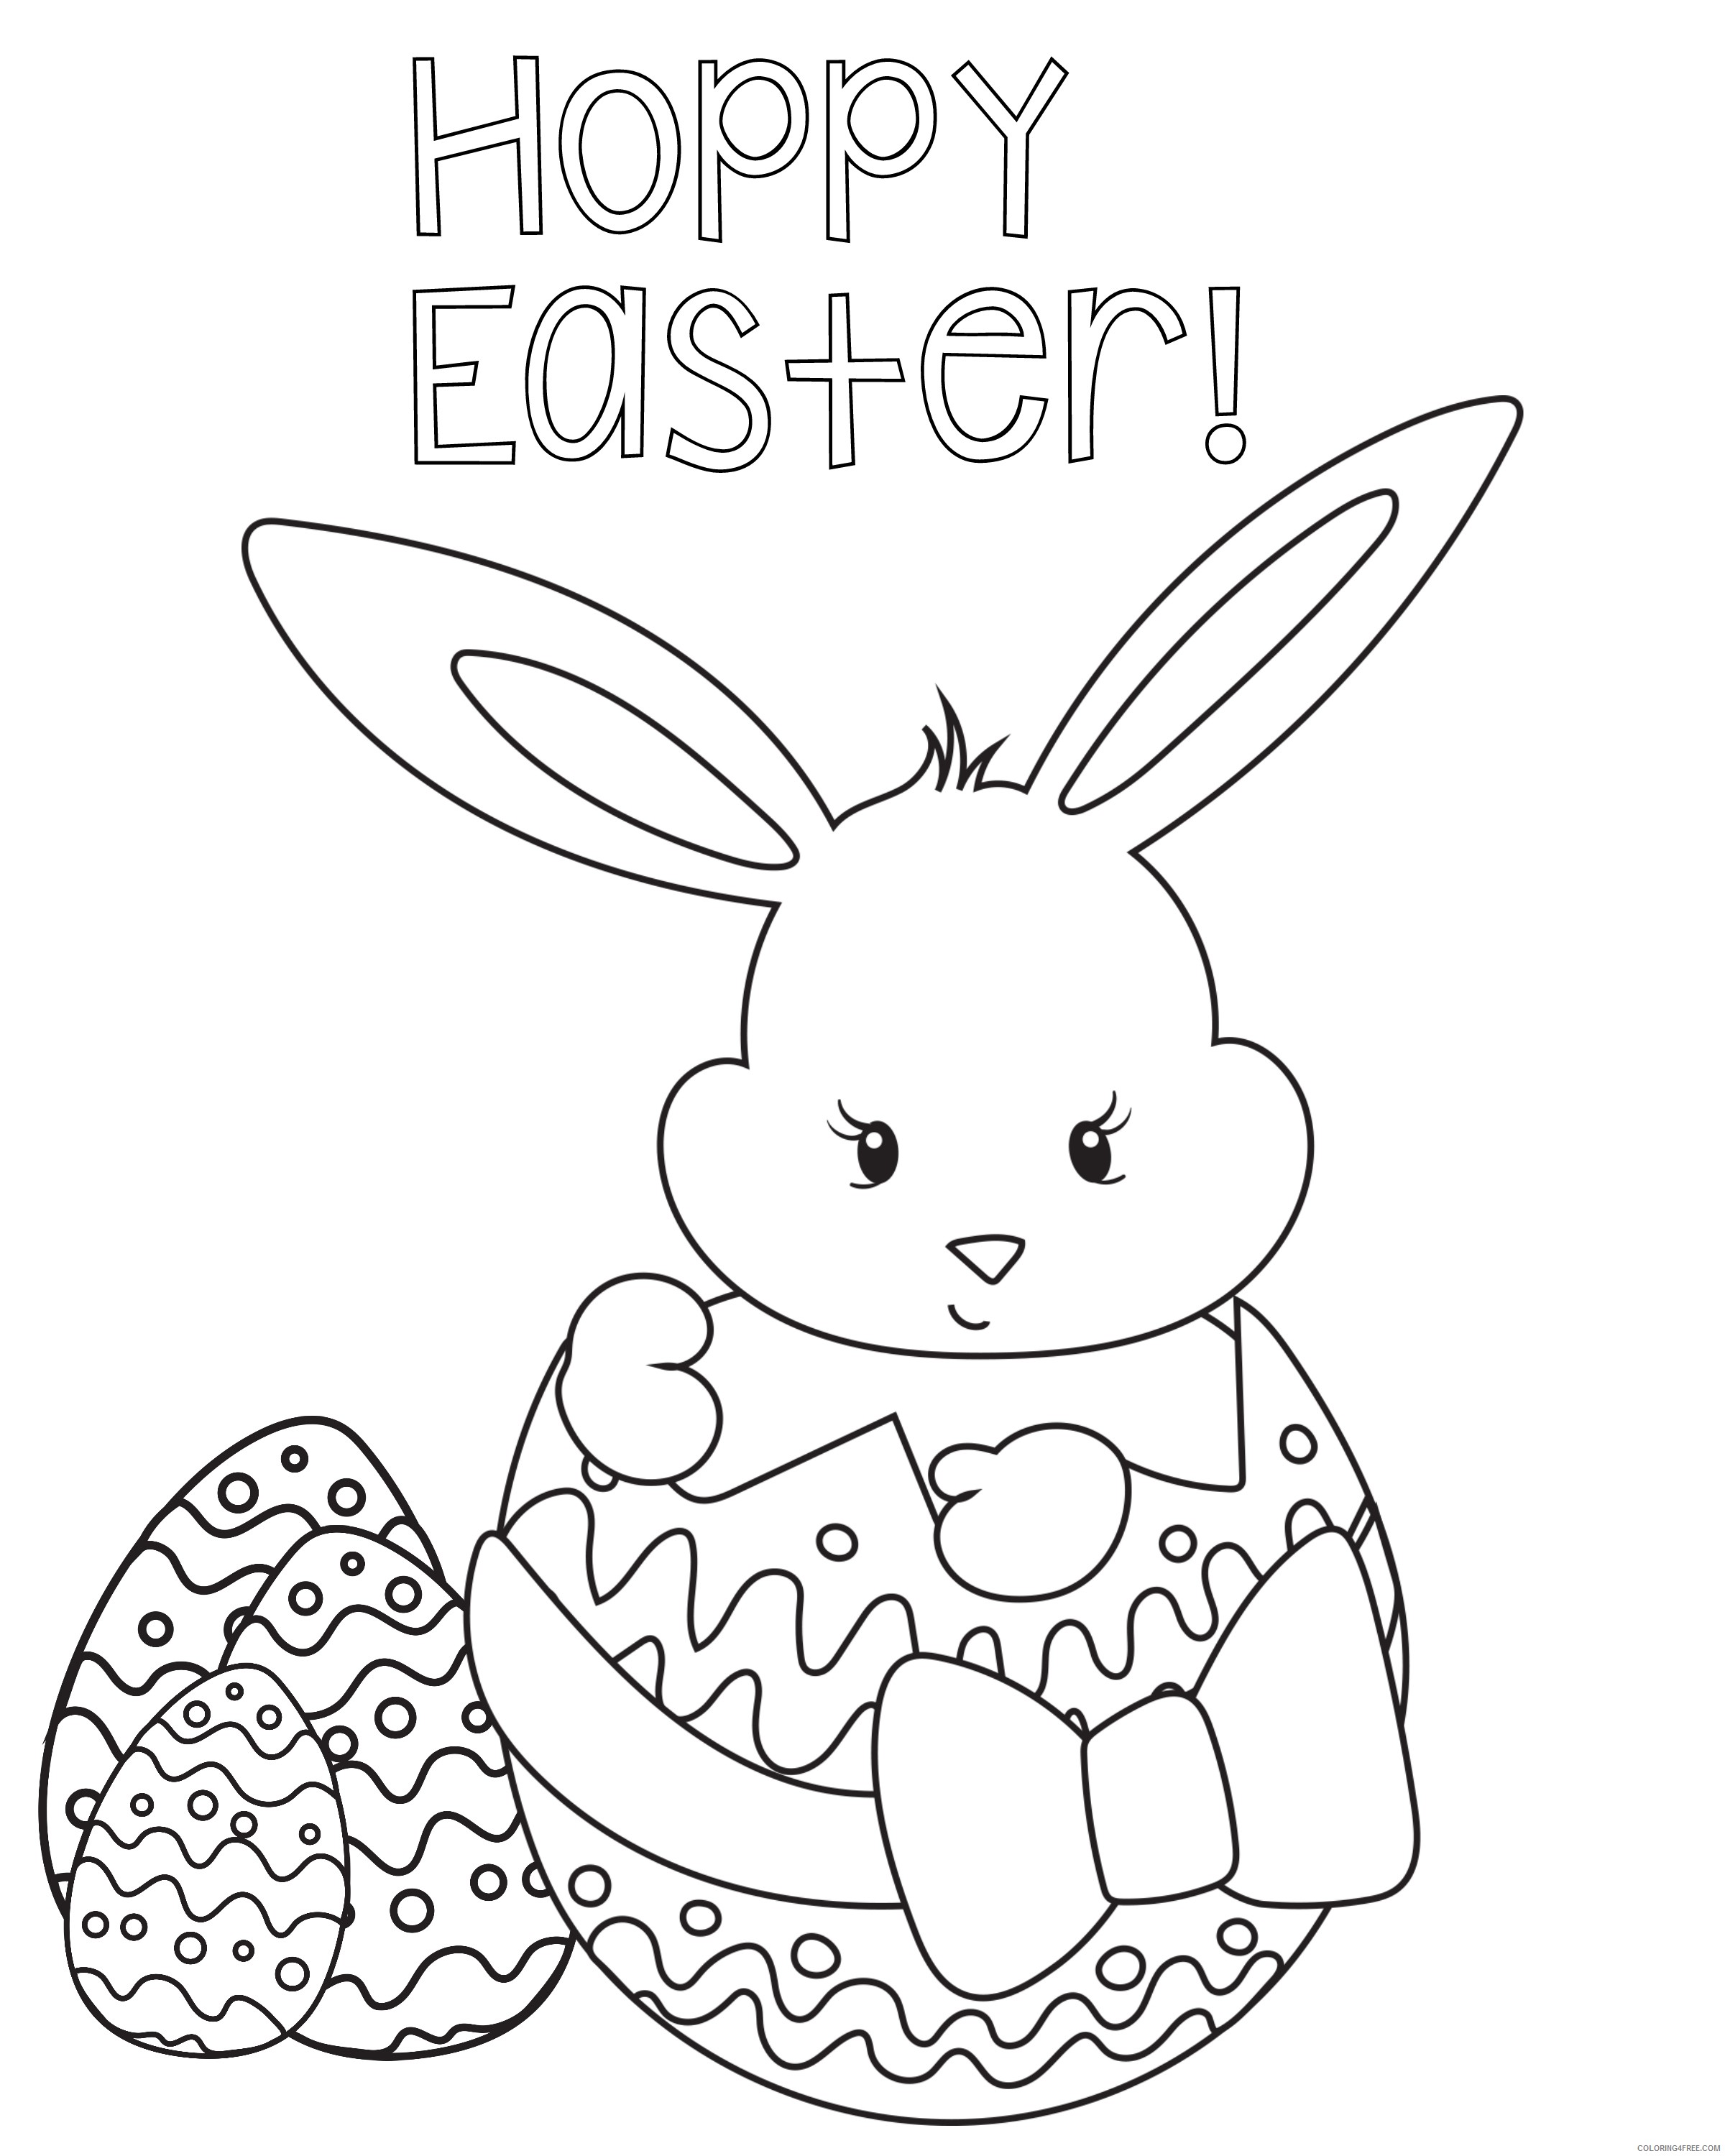 happy easter coloring pages for kids Coloring4free